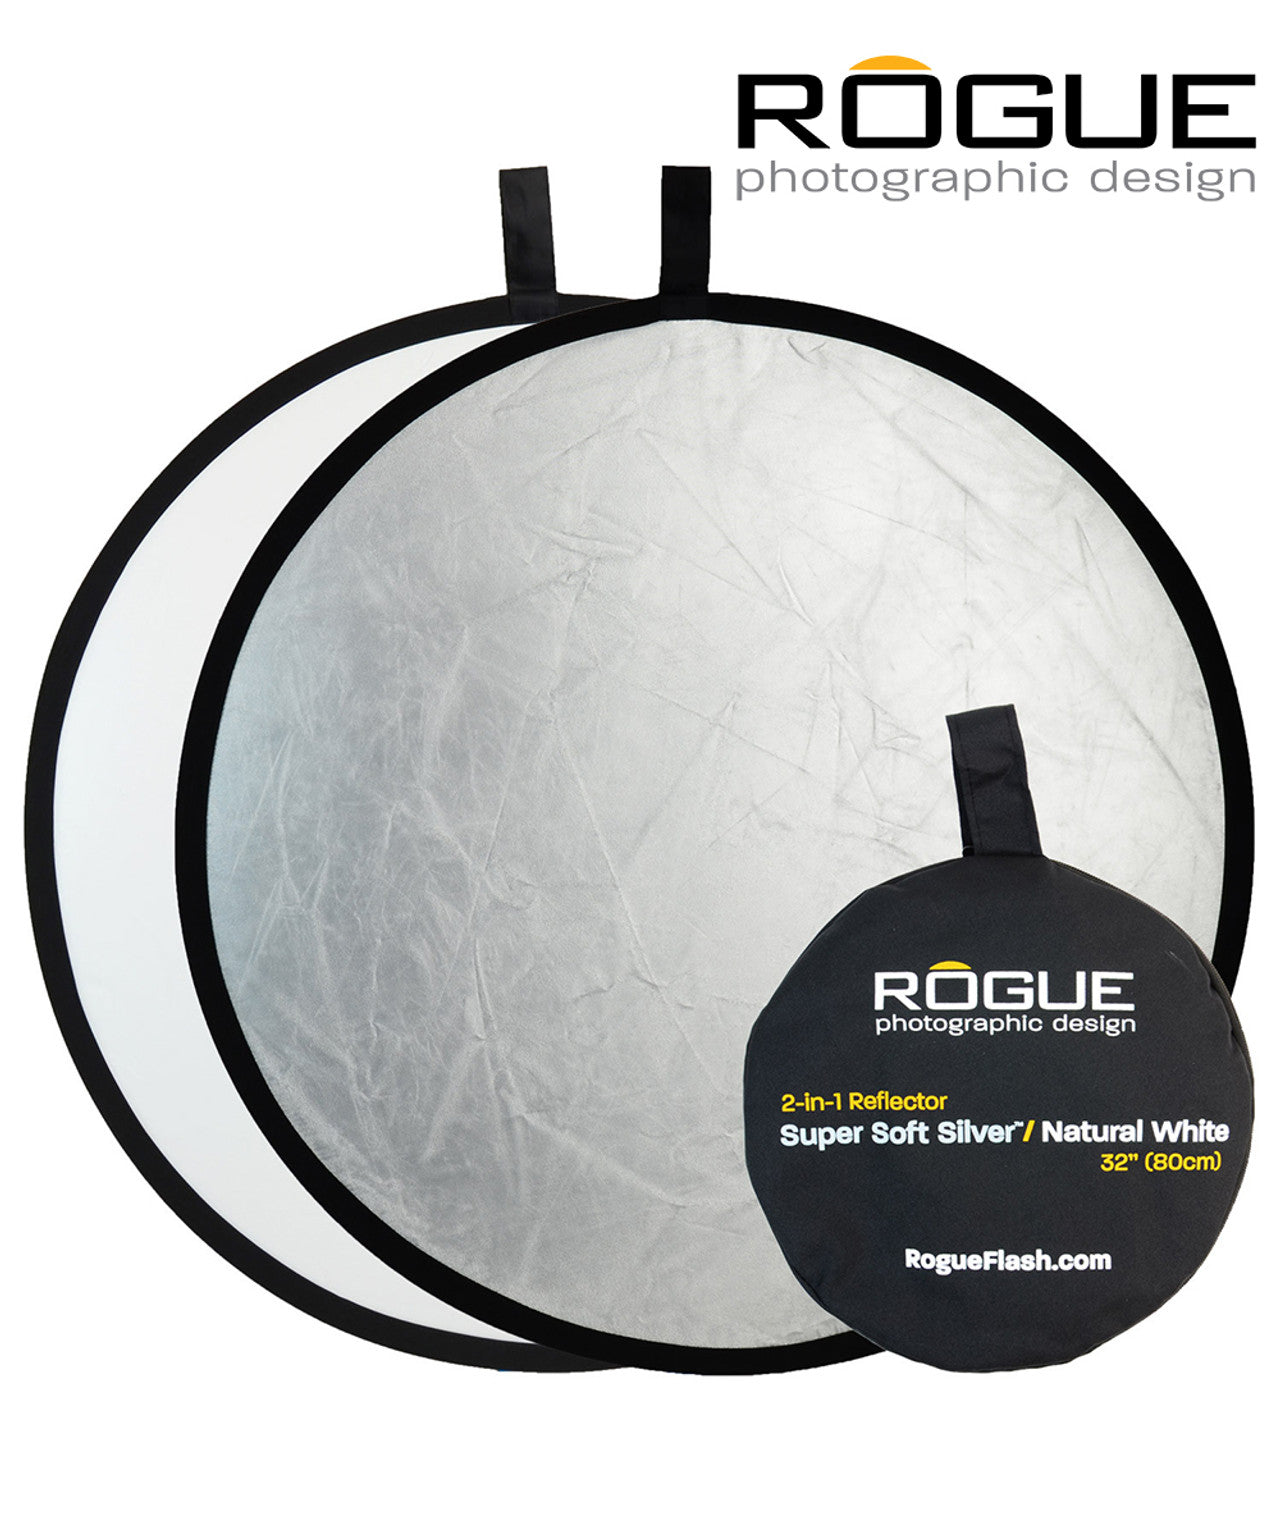 Rogue 32” (80cm) 2-in-1 Collapsible Reflector 二合一反光板